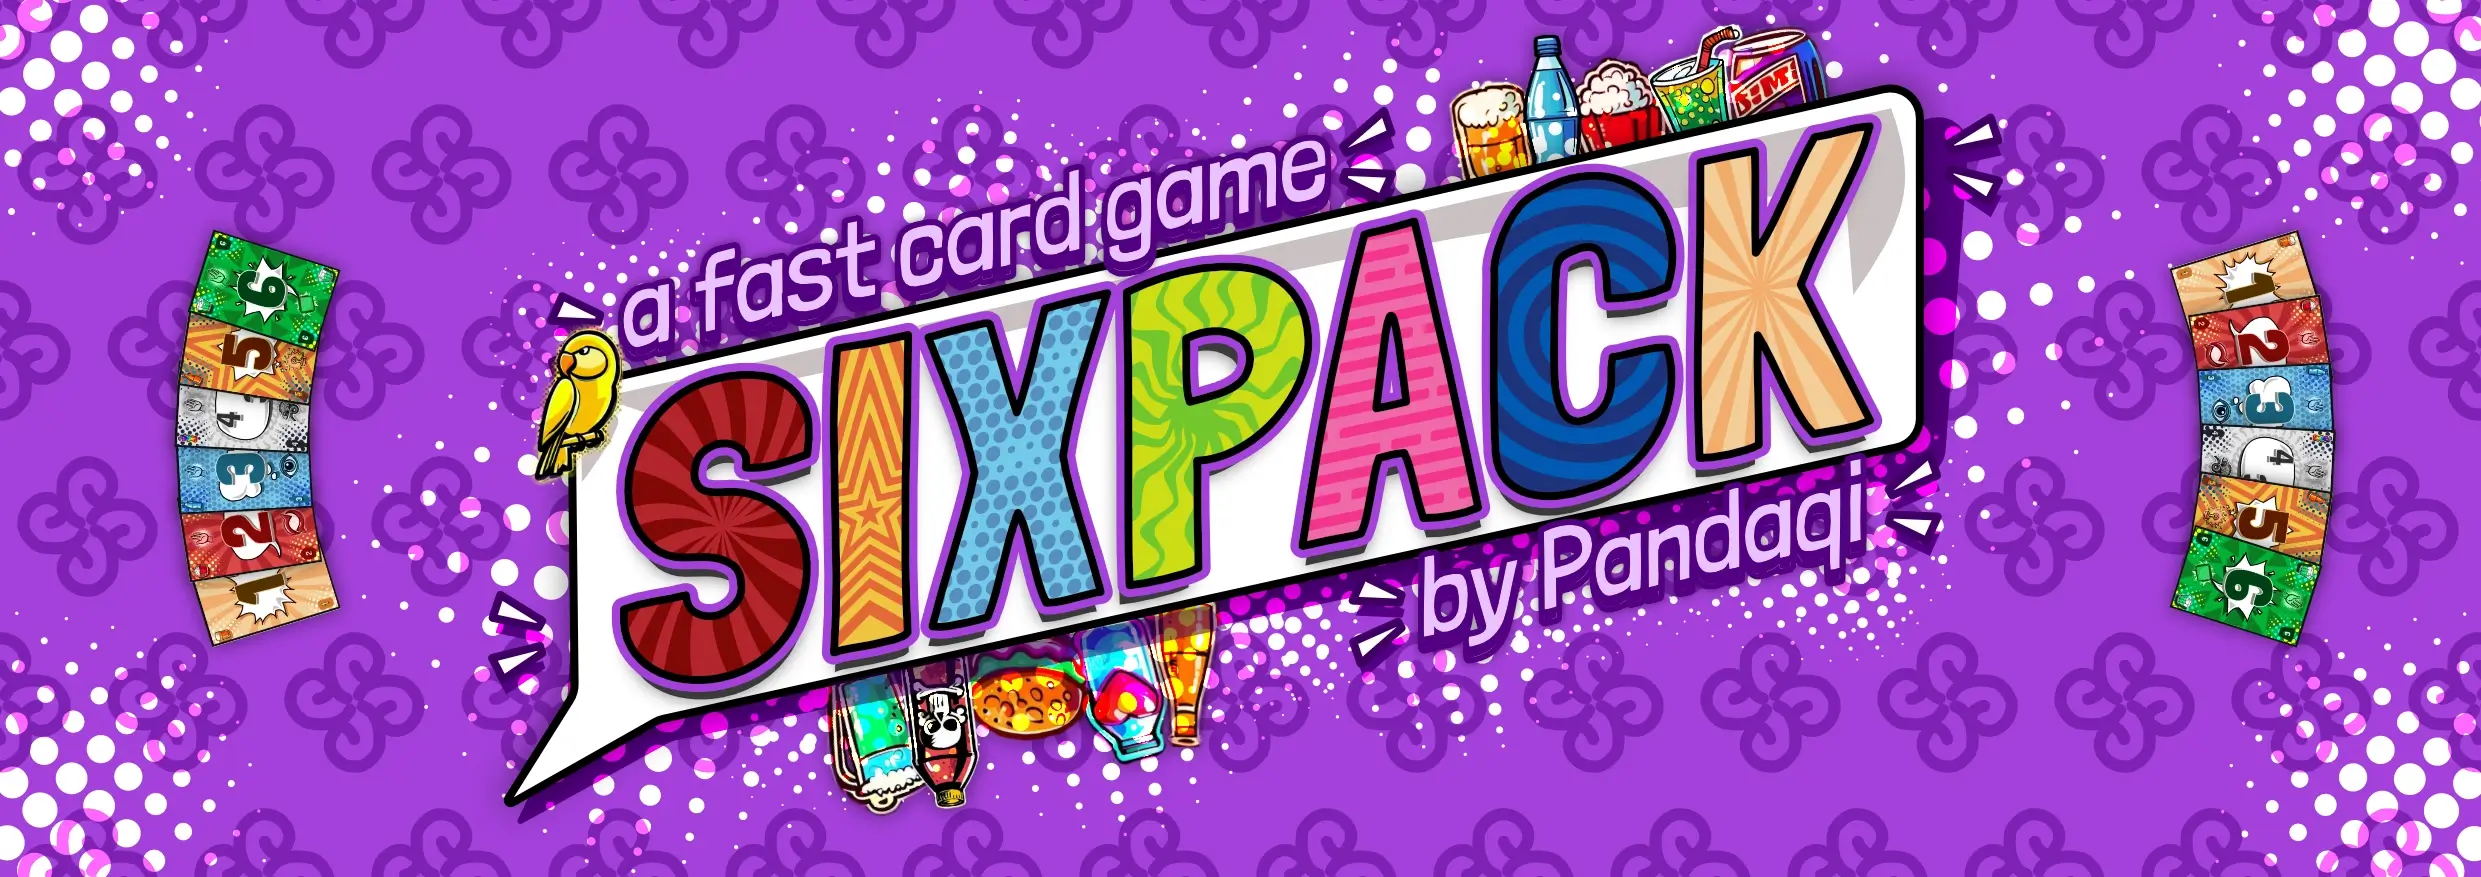 Header / Cover Image for 'Sixpack!'